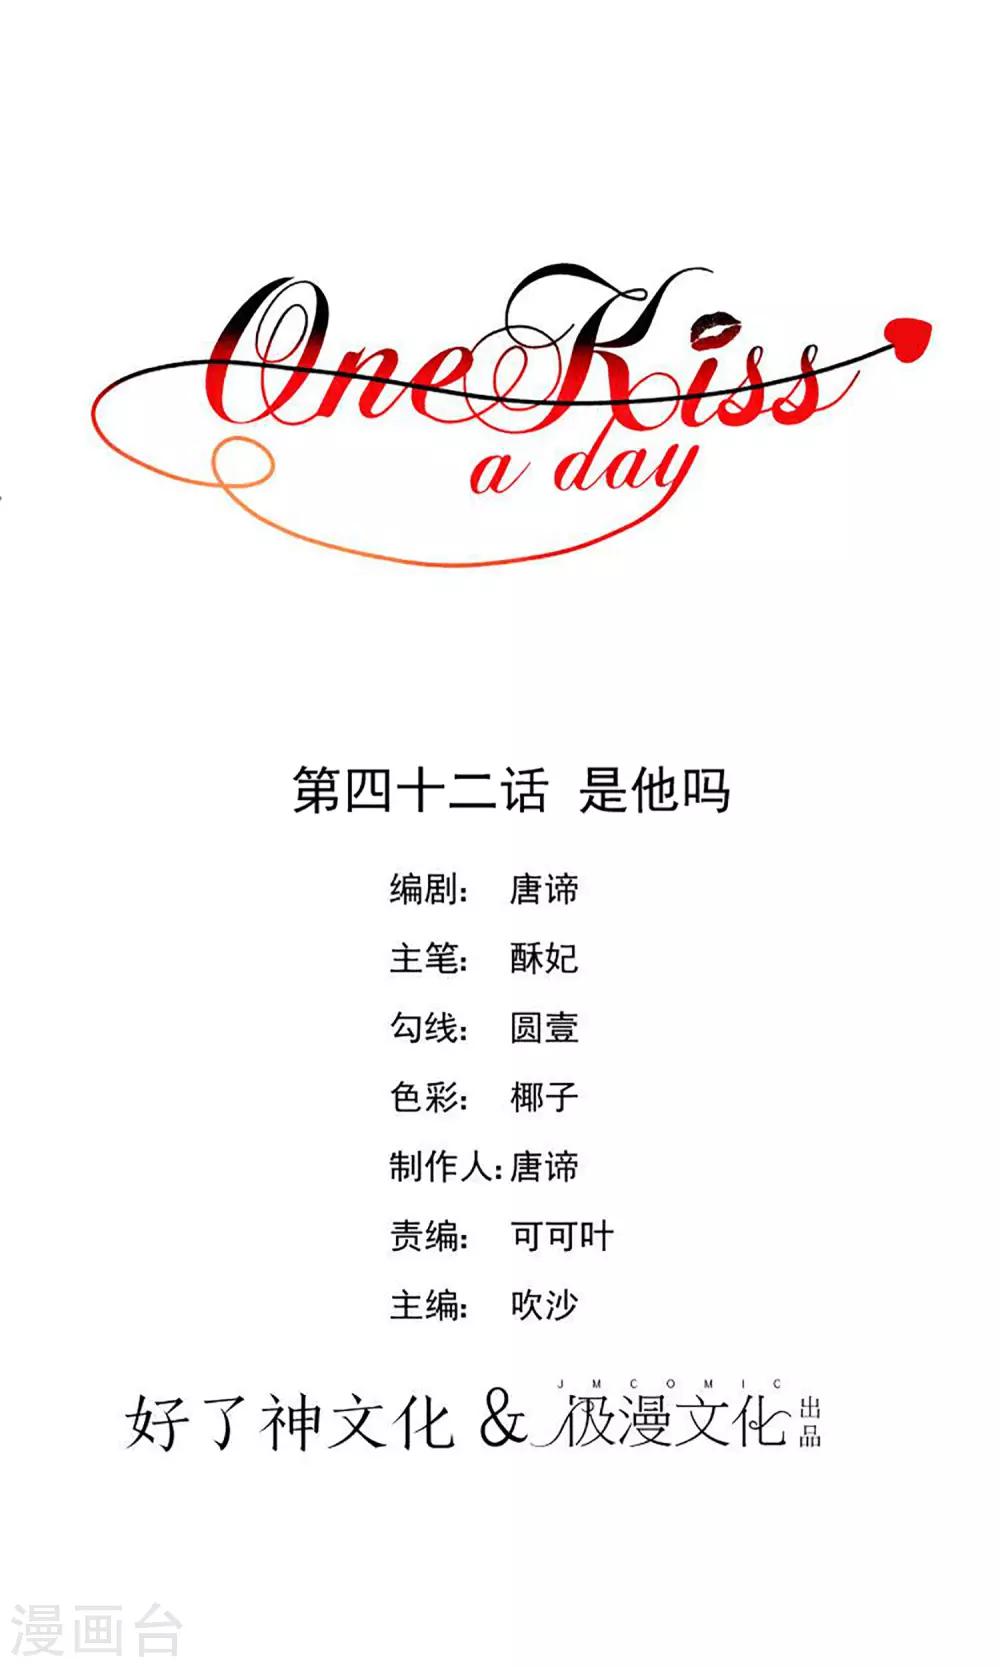 One Kiss A Day - 第42話 是他嗎？(1/2) - 1